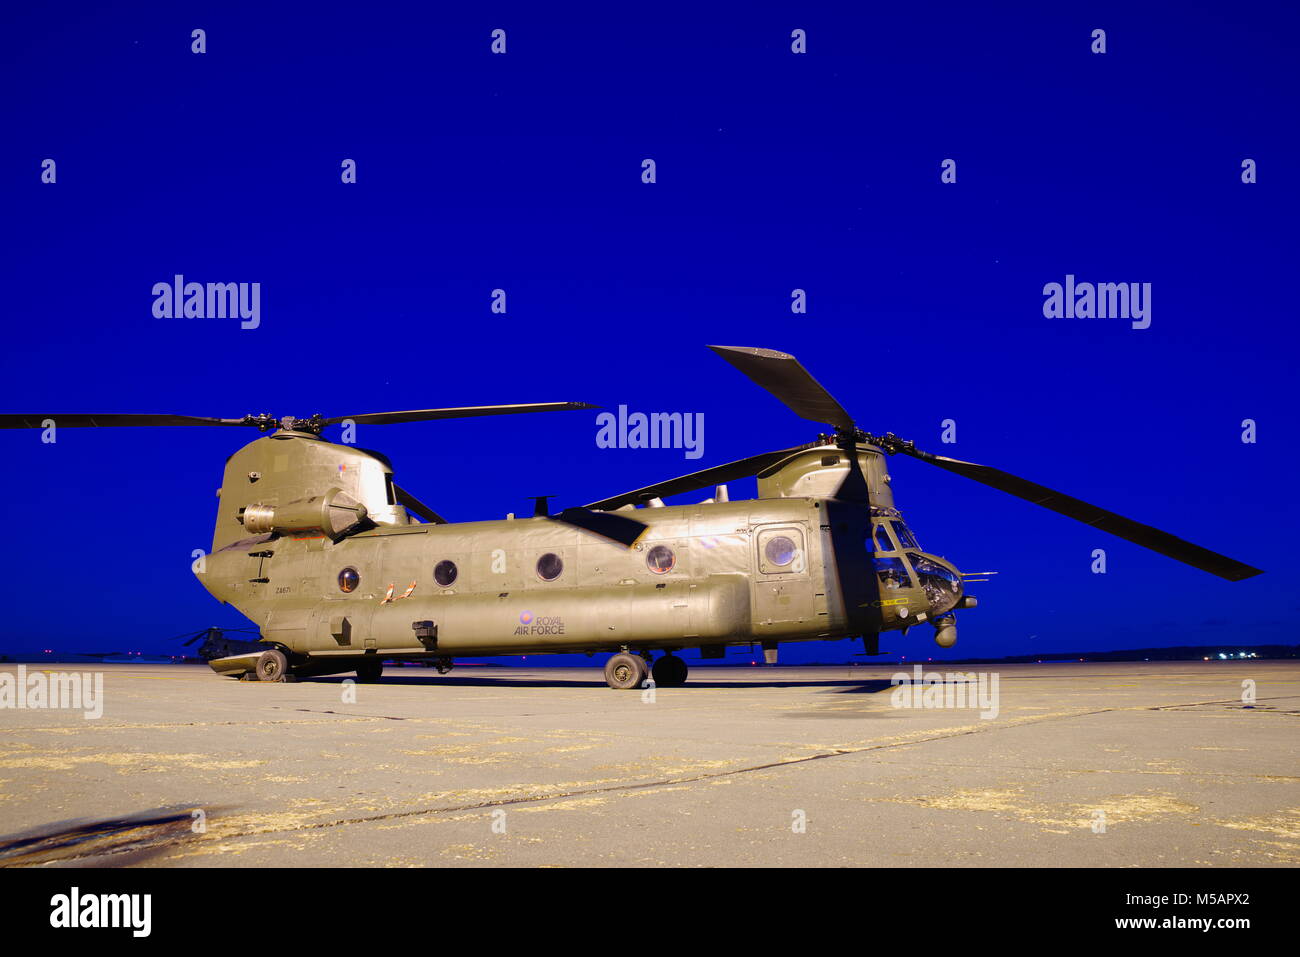 Boeing Vertol CH-47, Chinook Helicopter, RAF Odiham, Banque D'Images